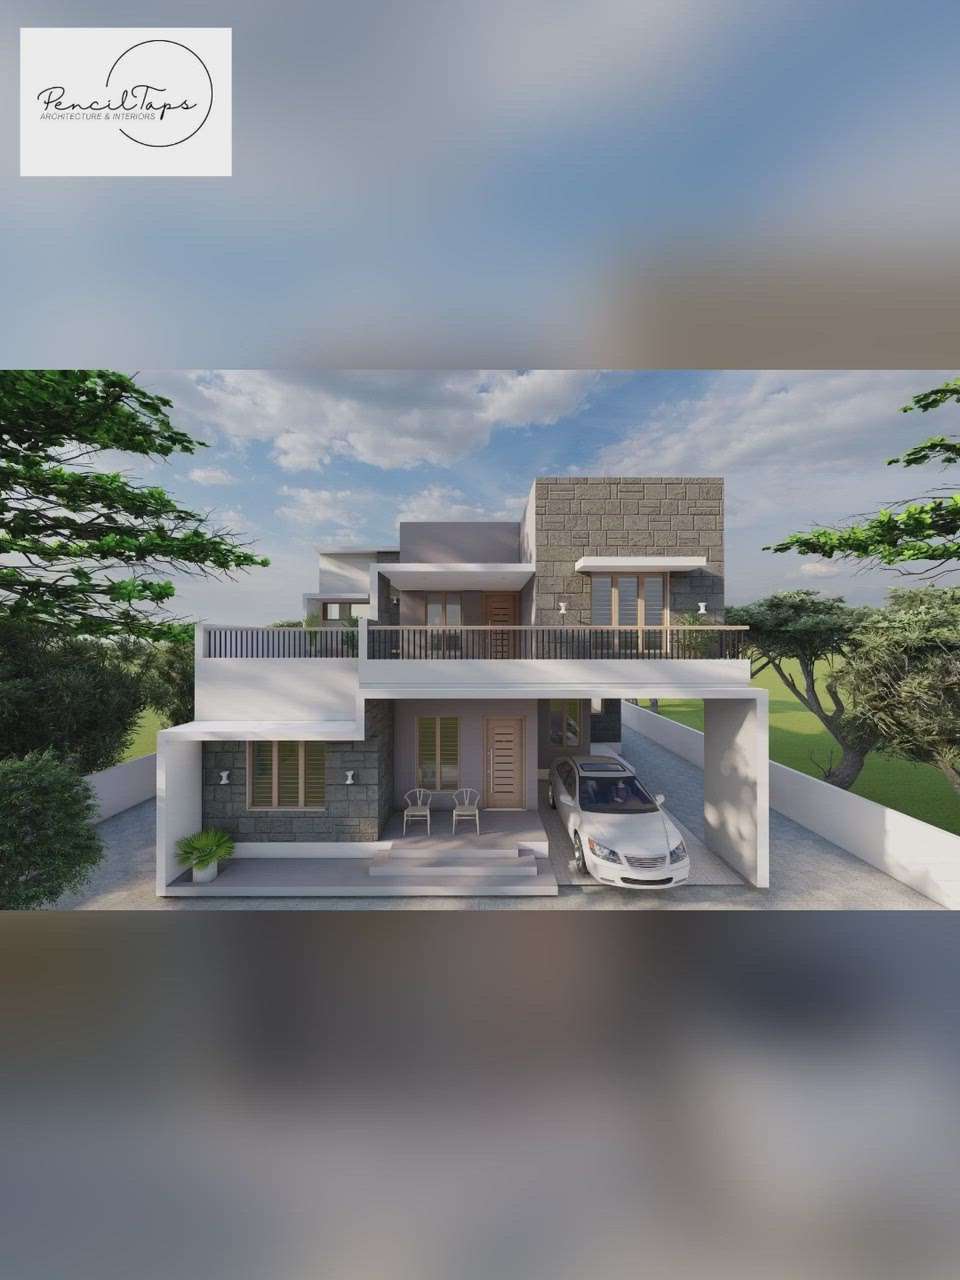 Site Chennamangalam
Area 2500 sqft
Budget 45 -50lakh
Architecture & interior - Penciltaps by suhana
Contractor- Basheer yusuf 

#plan
#freeplan
#Elevation